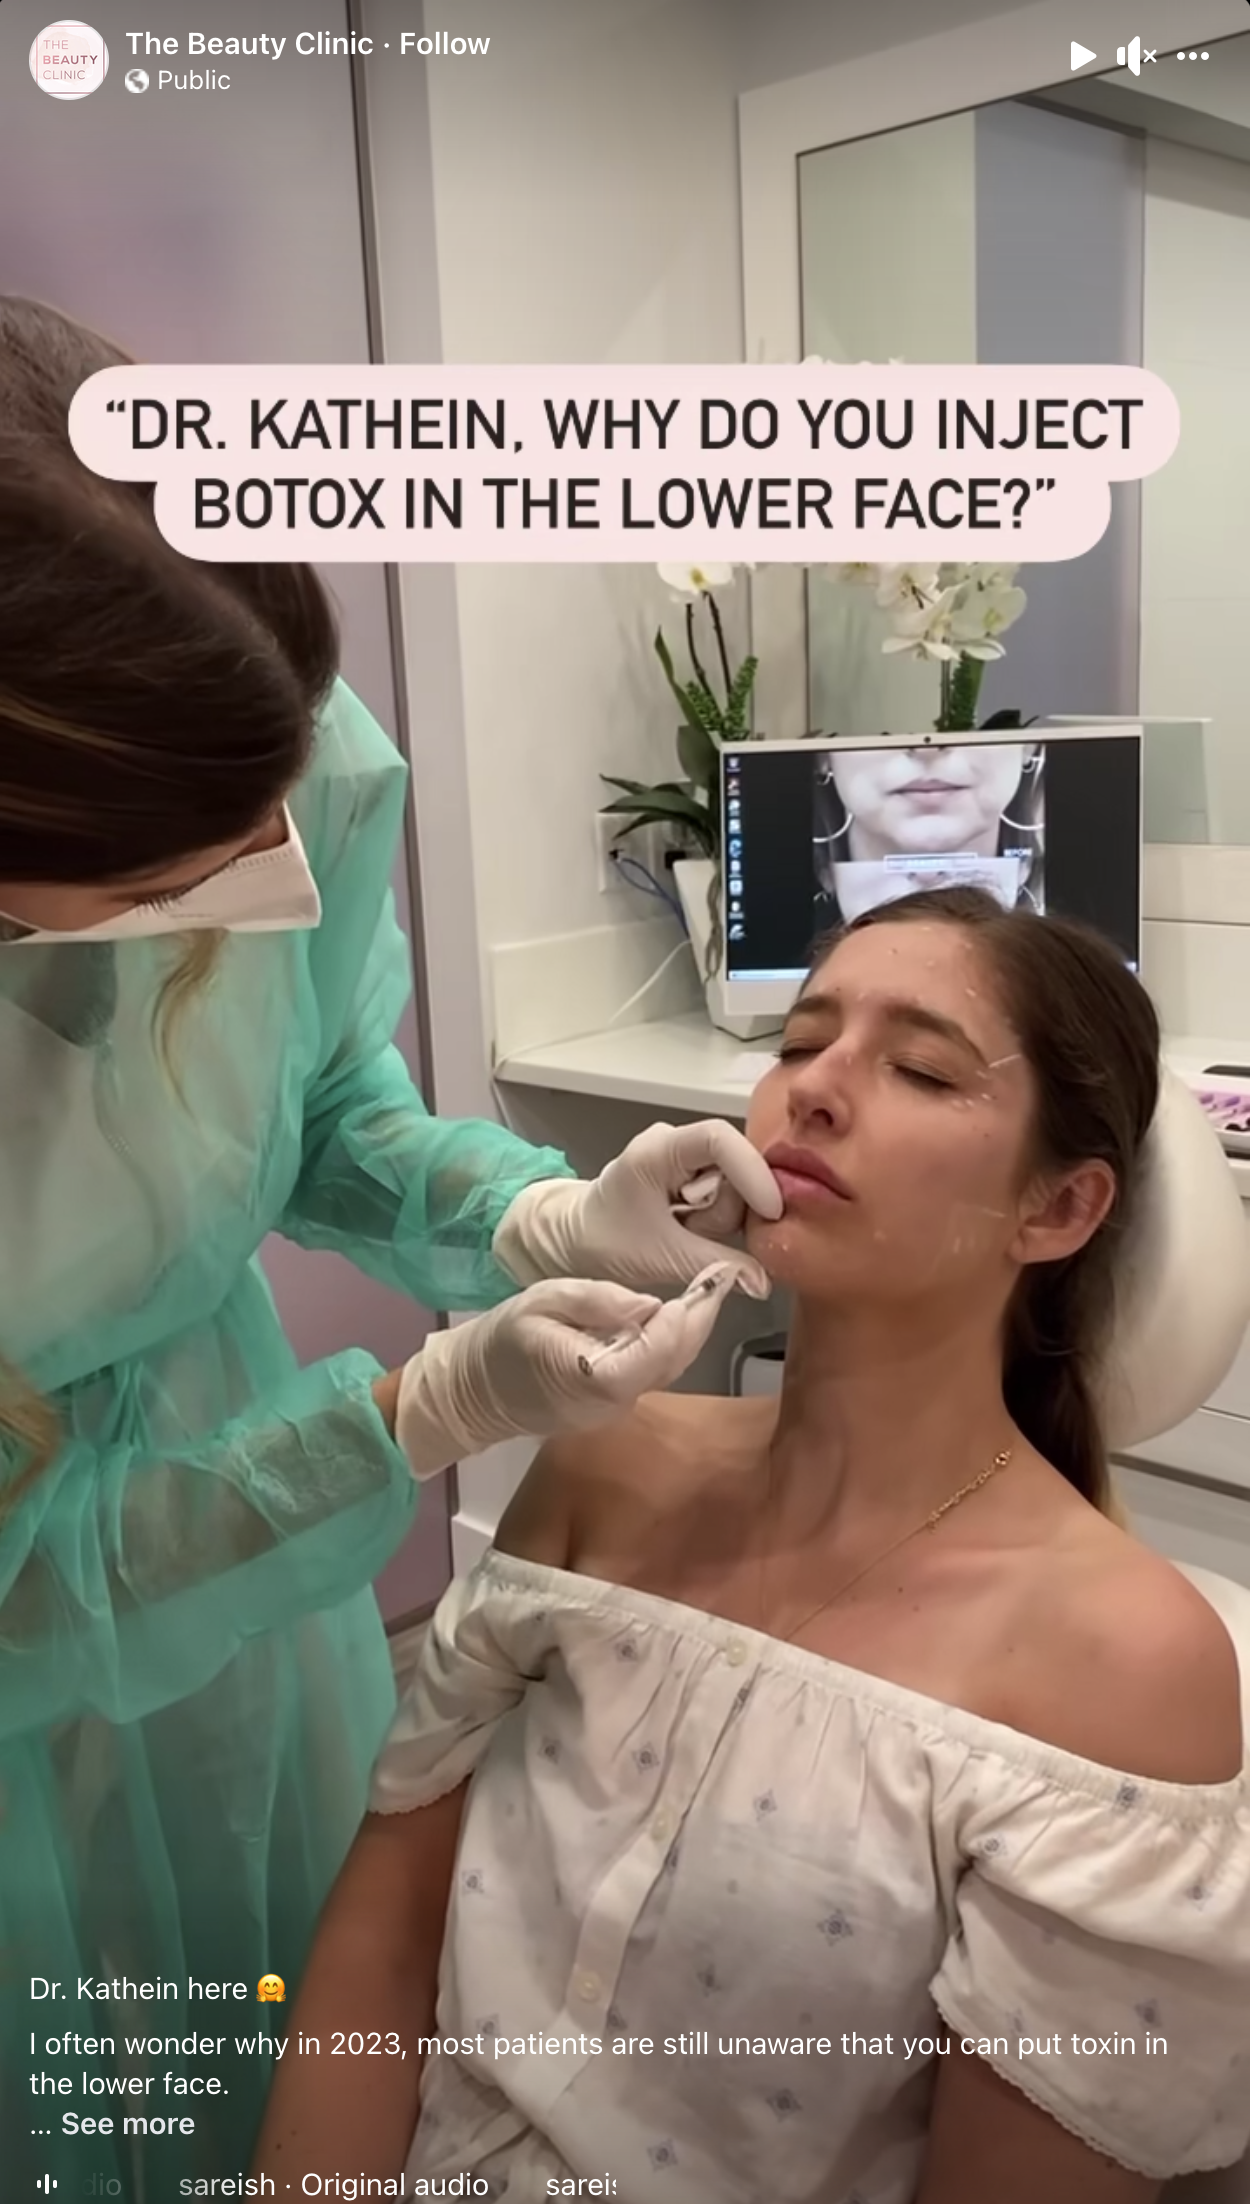 I often wonder why in 2023, most patients are still unaware that you can put toxin in the lower face.